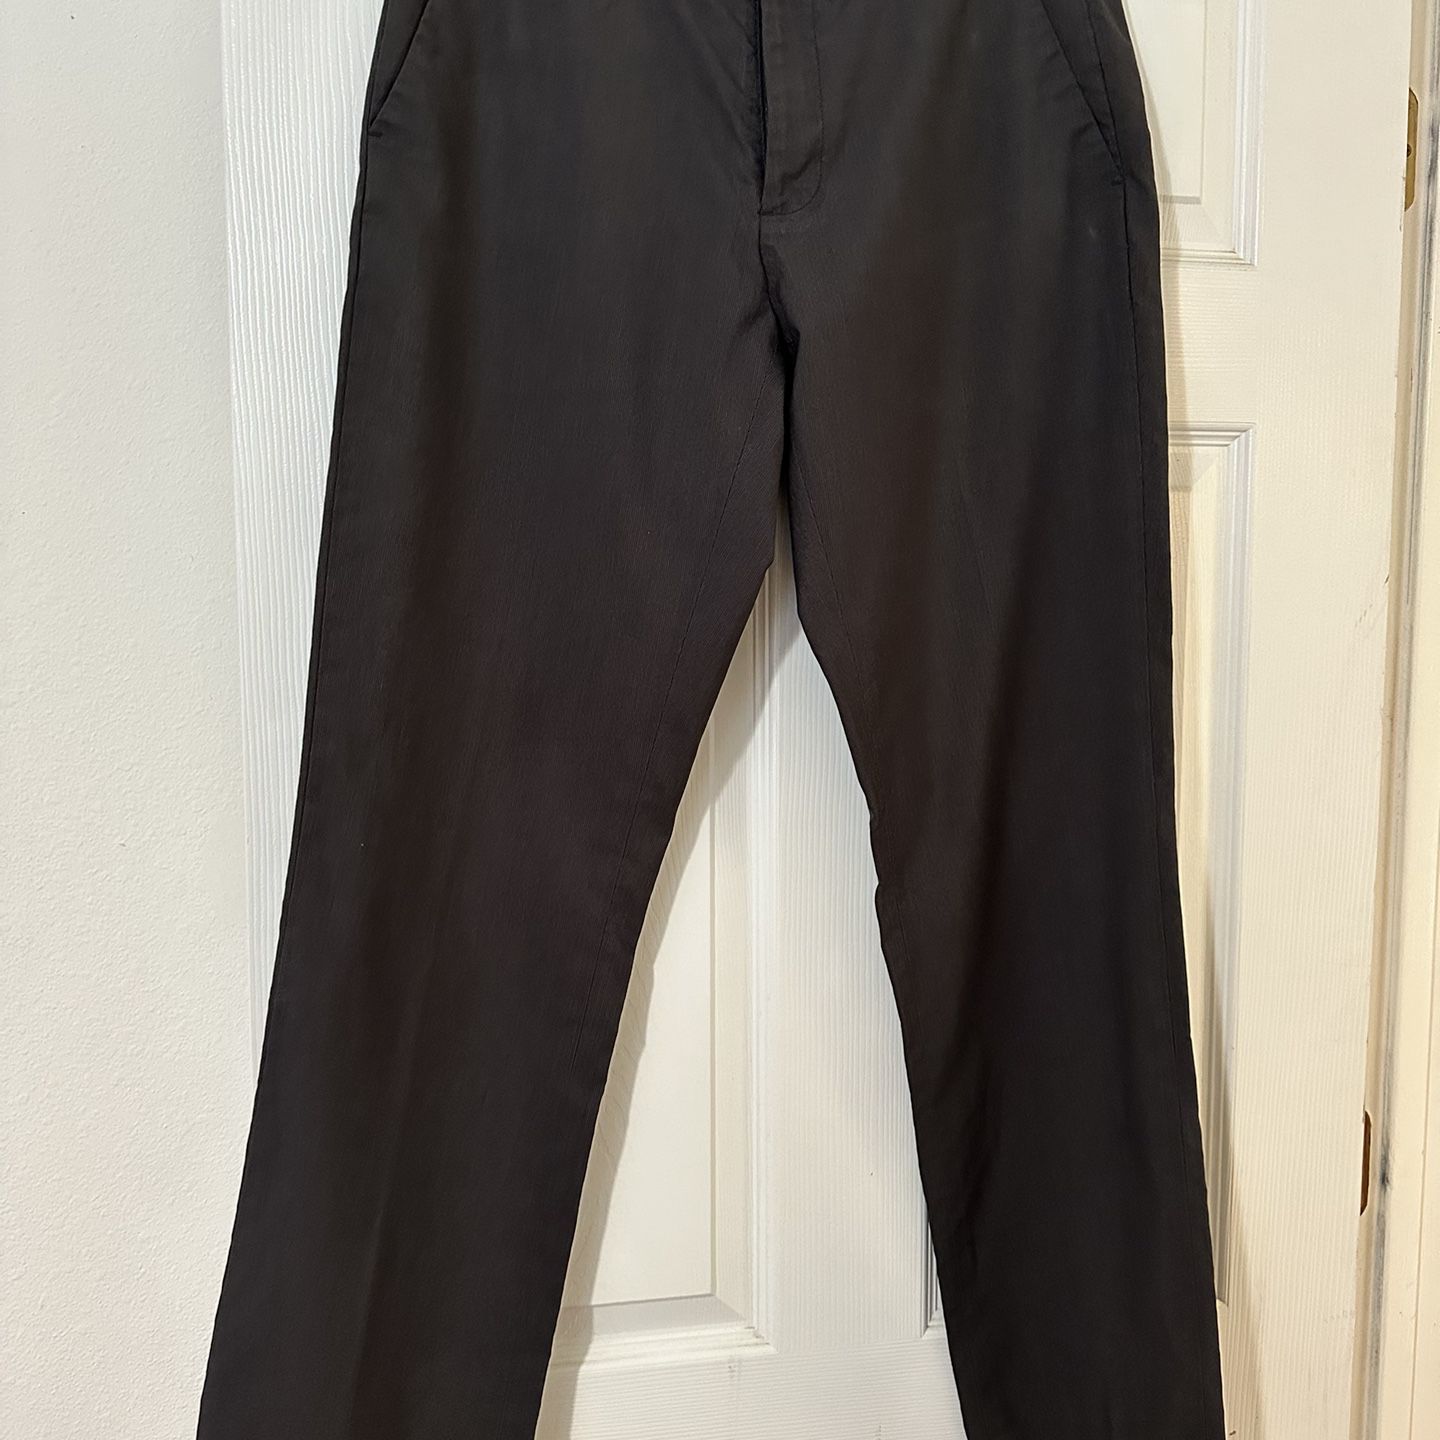 Calvin Klein Mens Dress Pants 32/32 Charcoal Grey for Sale in Albuquerque,  NM - OfferUp